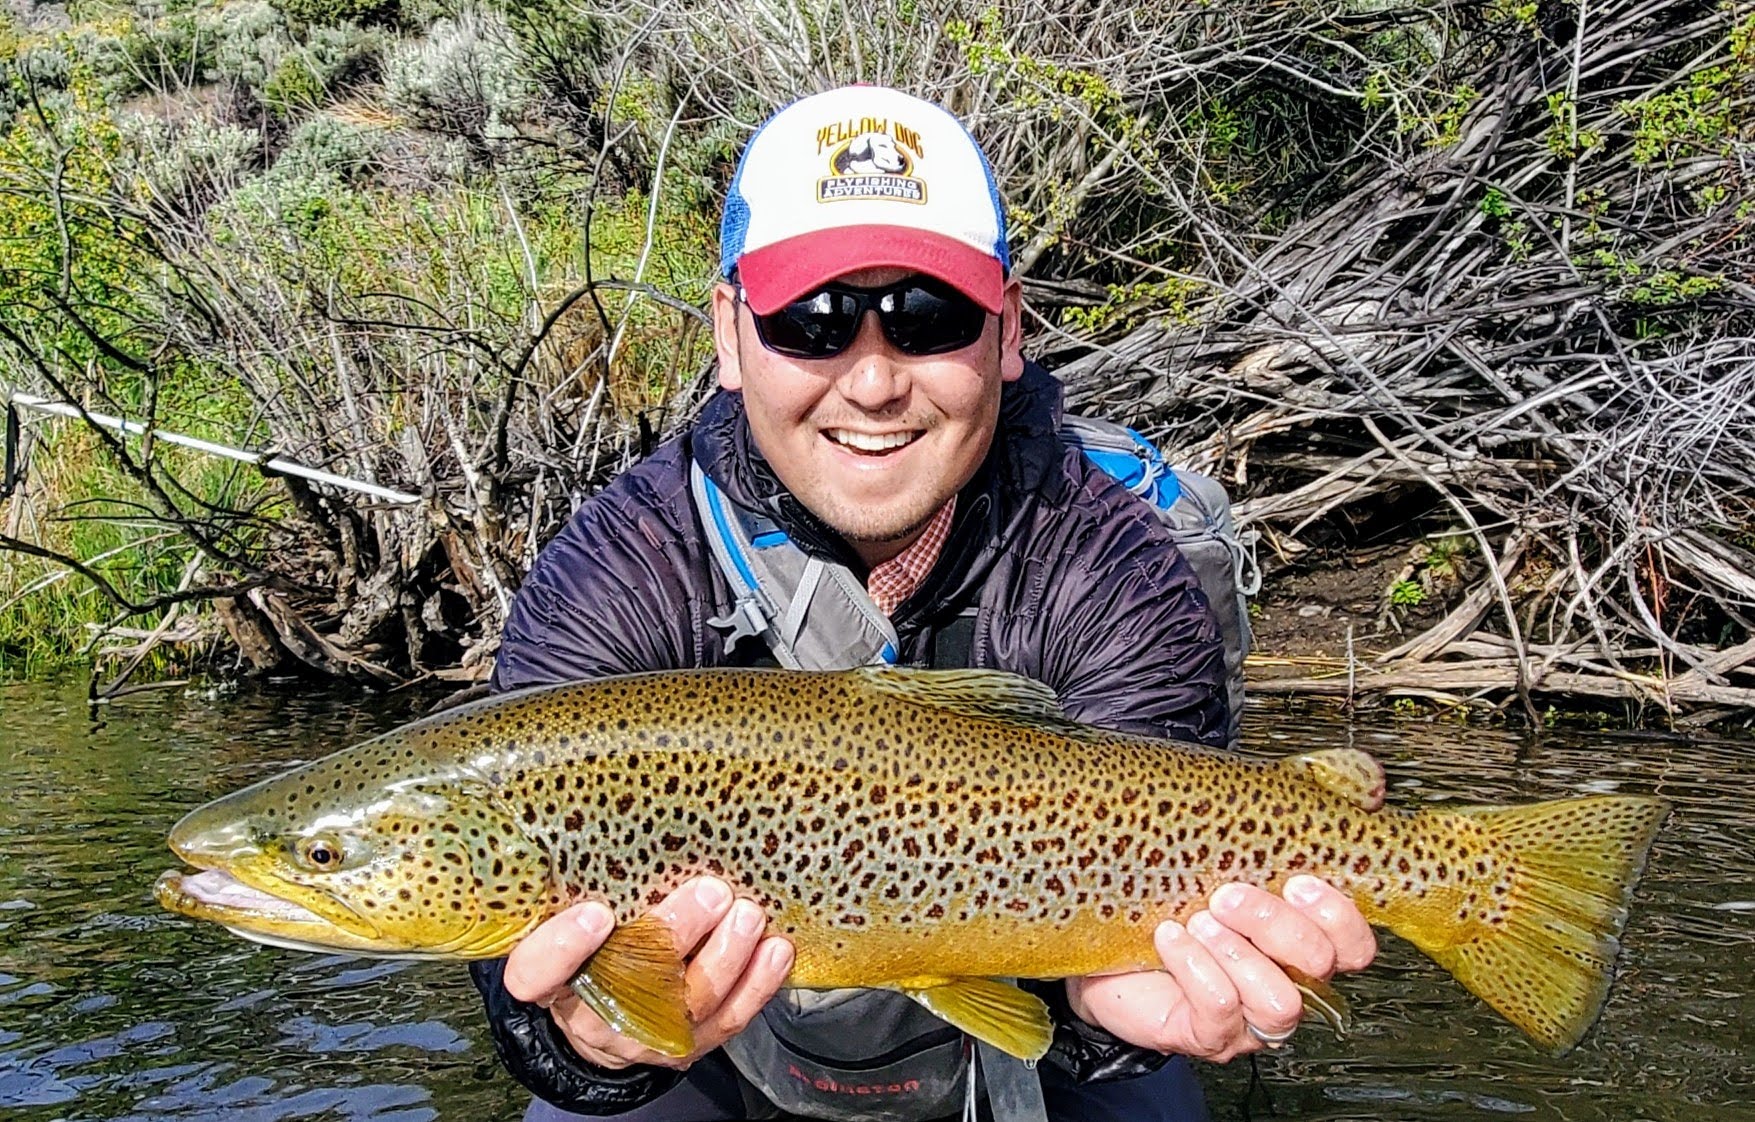 A fly fisherman wading in the East Walker River and holding a trophy brown trout.